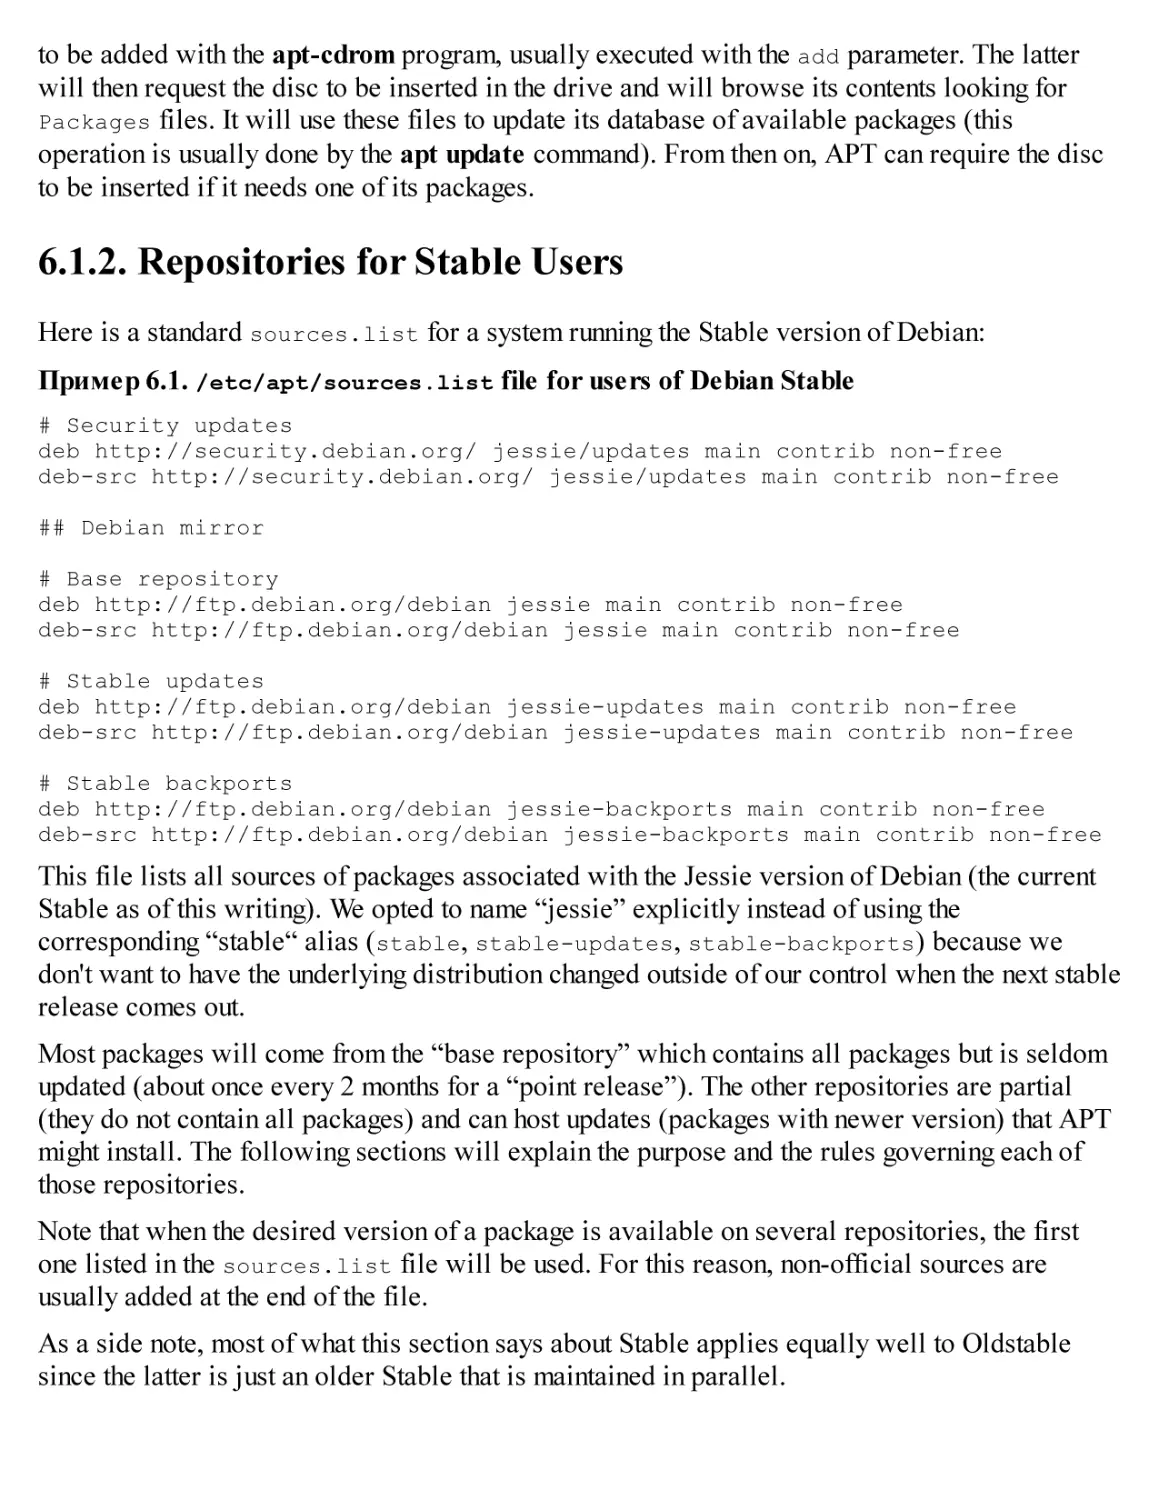 6.1.2. Repositories for Stable Users